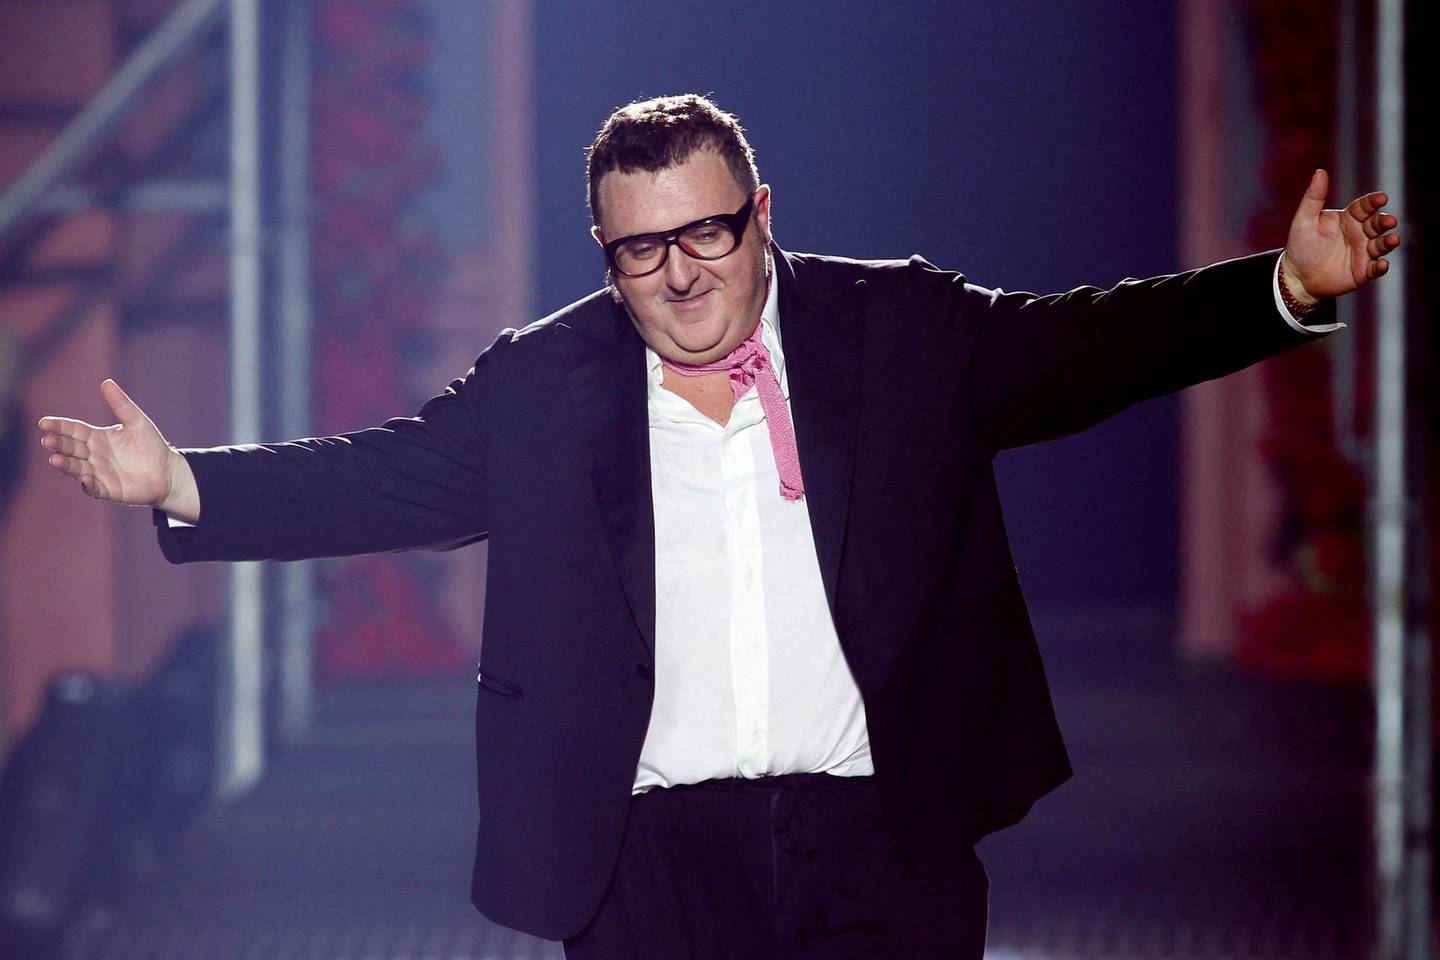 (FILES) In this file photo taken on September 27, 2012 Moroccan-born Israeli fashion designer for Lanvin Alber Elbaz, acknowledges the public at the end of the Spring/Summer 2013 ready-to-wear collection show in Paris. Fashion designer Alber Elbaz, 59, has died today in Paris announced fashion Richemont luxury group  on April 25, 2021.  / AFP / FRANCOIS GUILLOT
